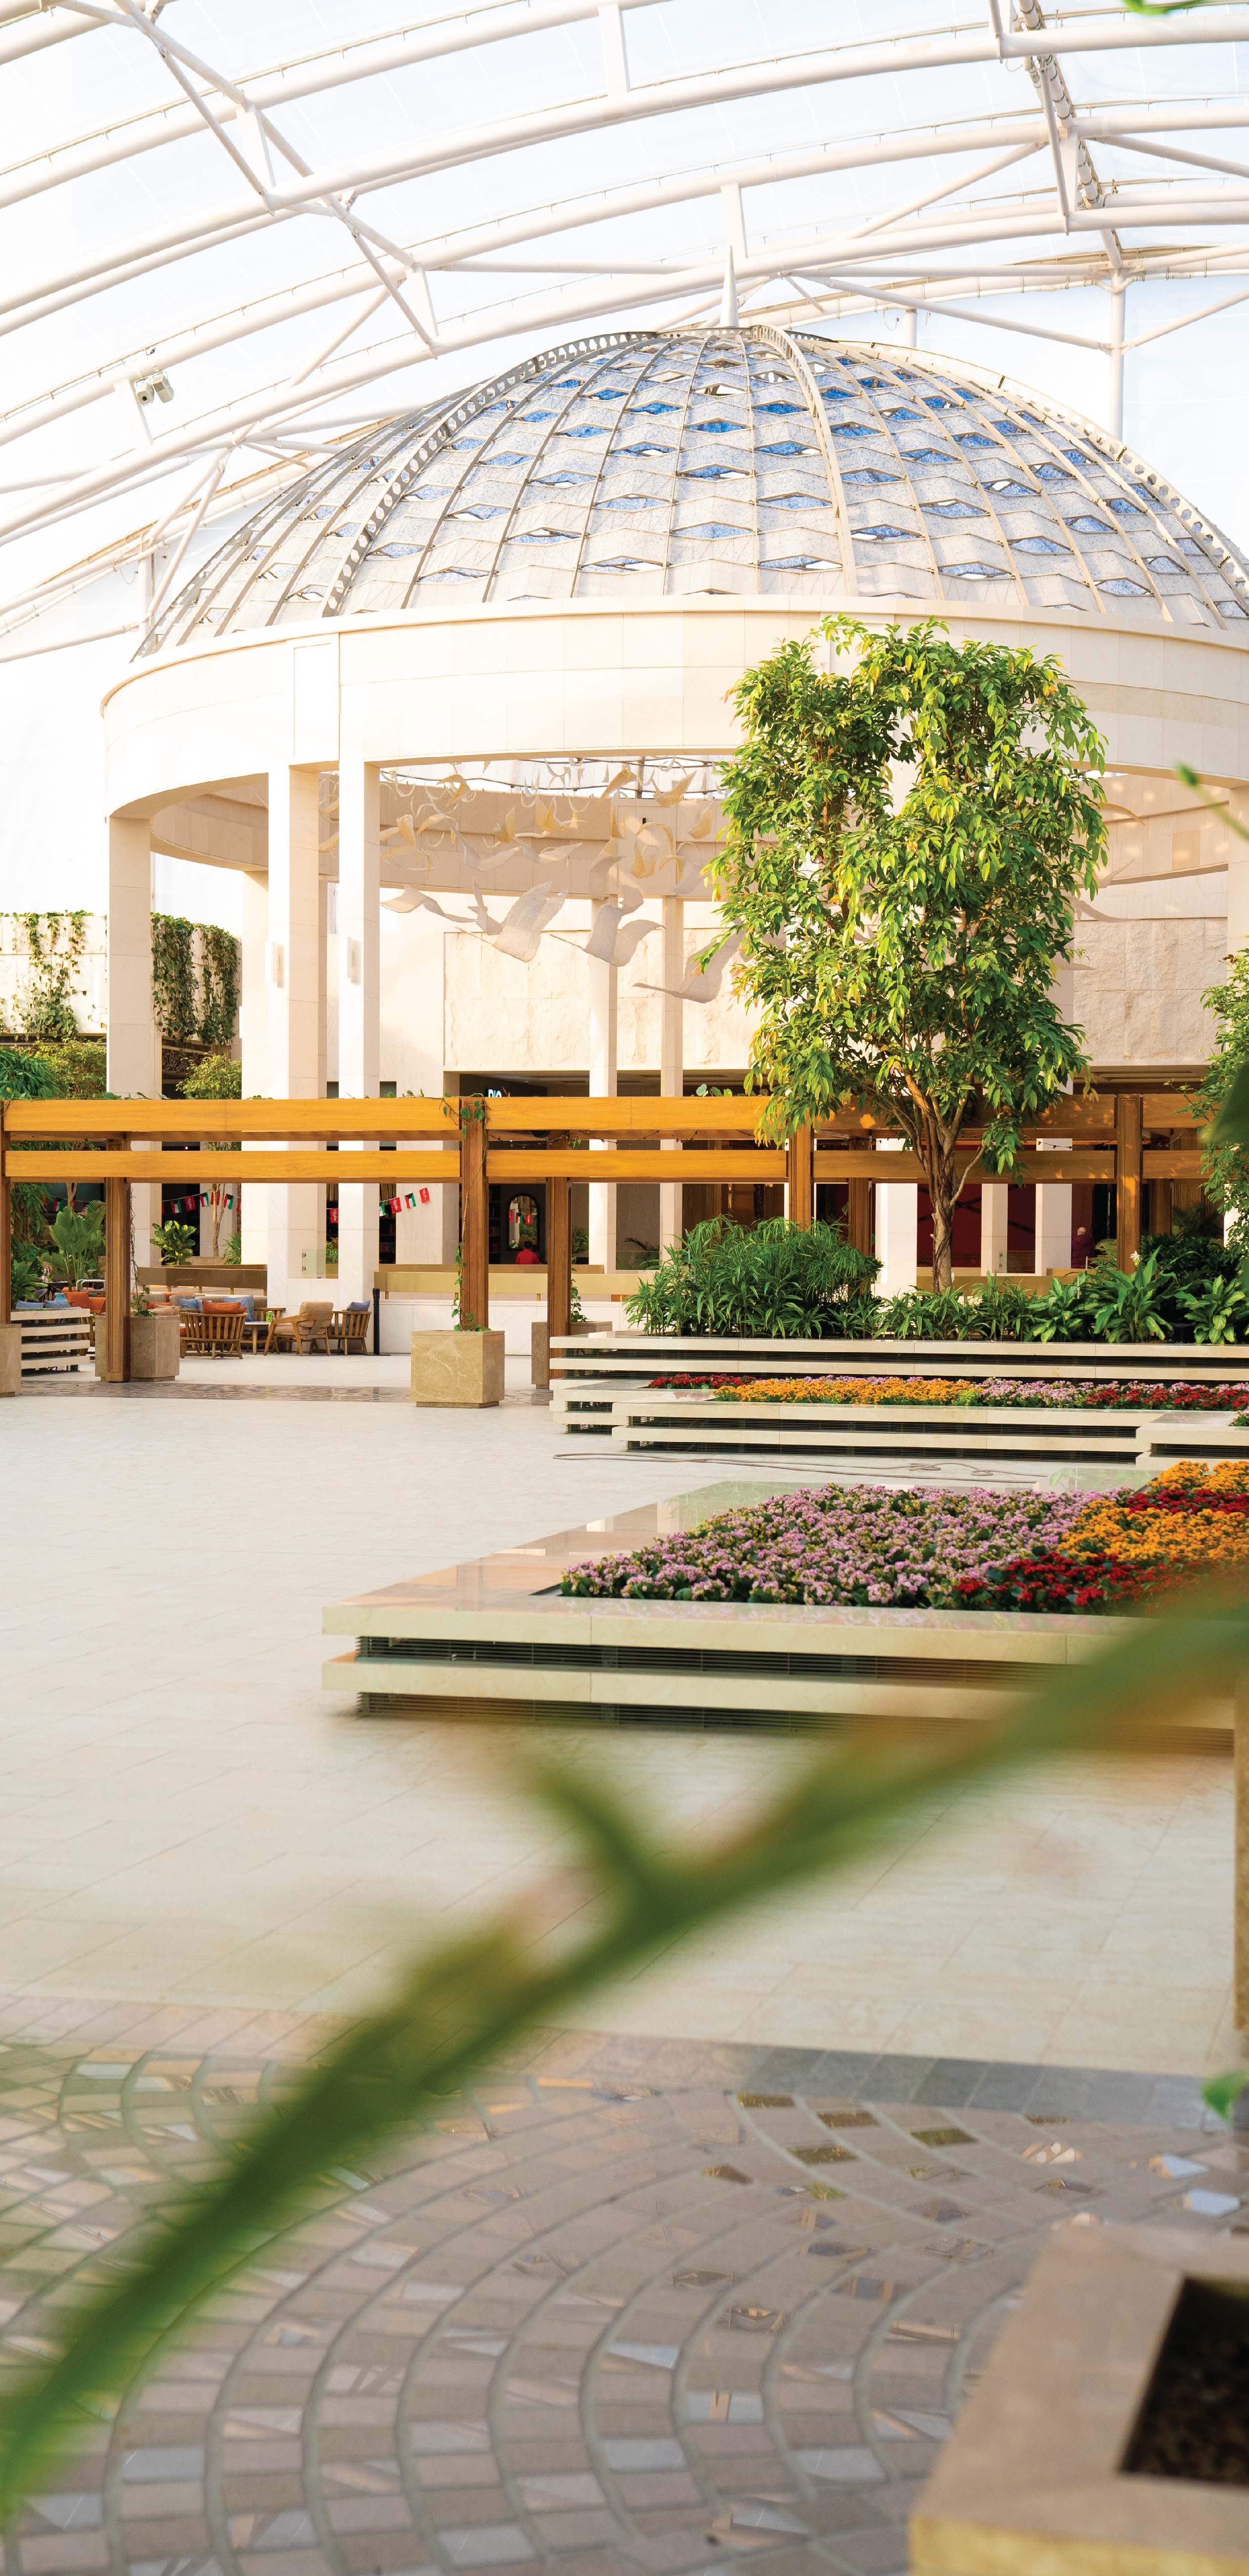 The Avenues Mall | Shopping Mall in Kuwait | Location, Address, Working Hours